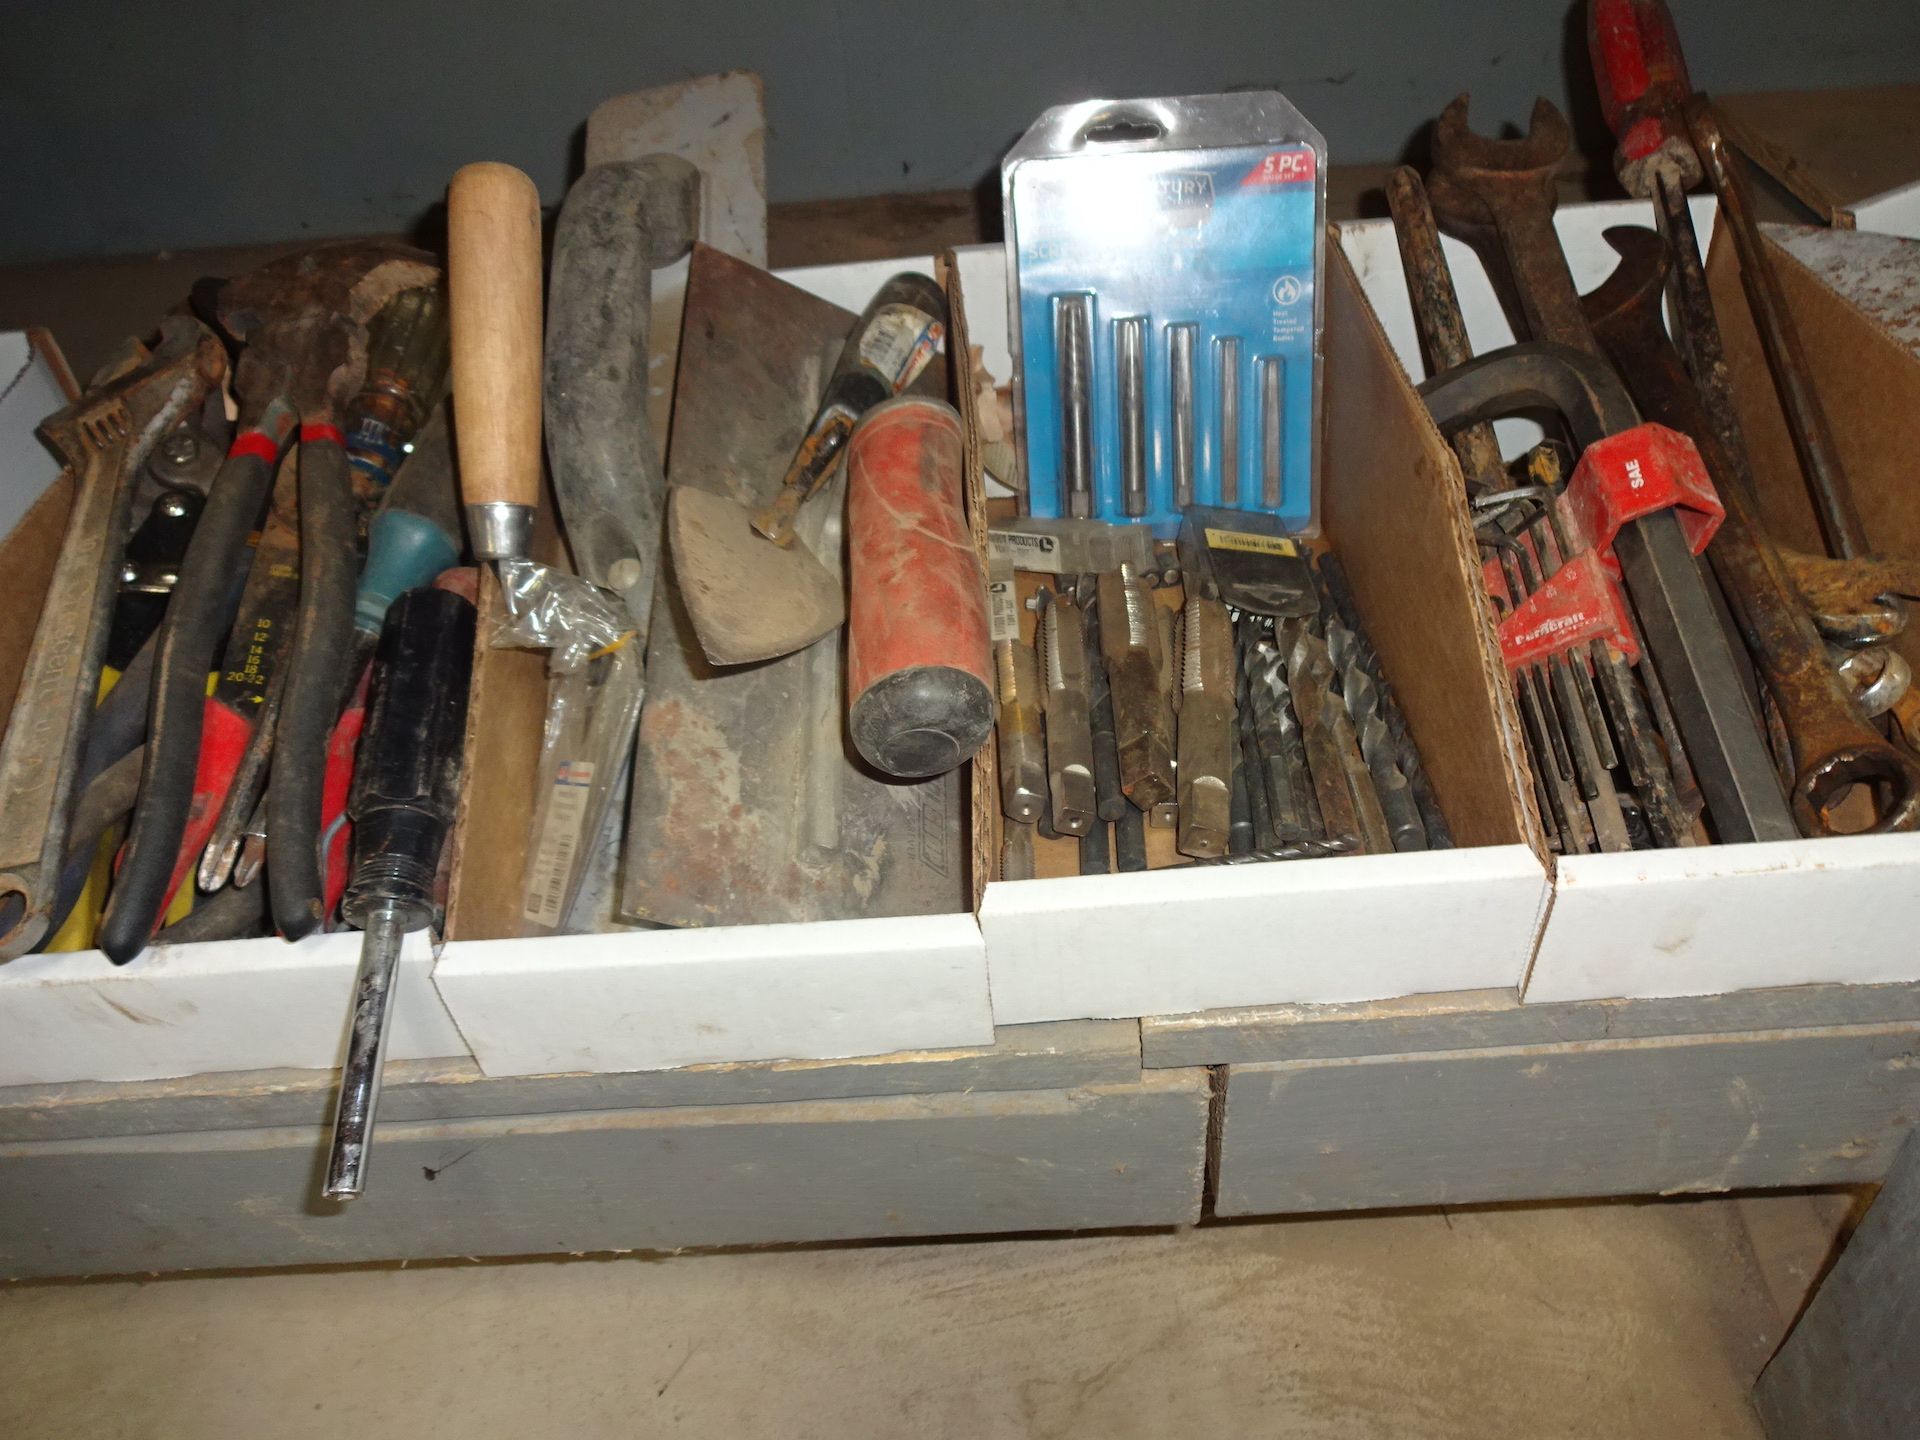 ASSORTED HAND TOOLS INCLUDING PLIERS, SCREWDRIVERS, WRENCHES & TAPE MEASURES - Image 2 of 2